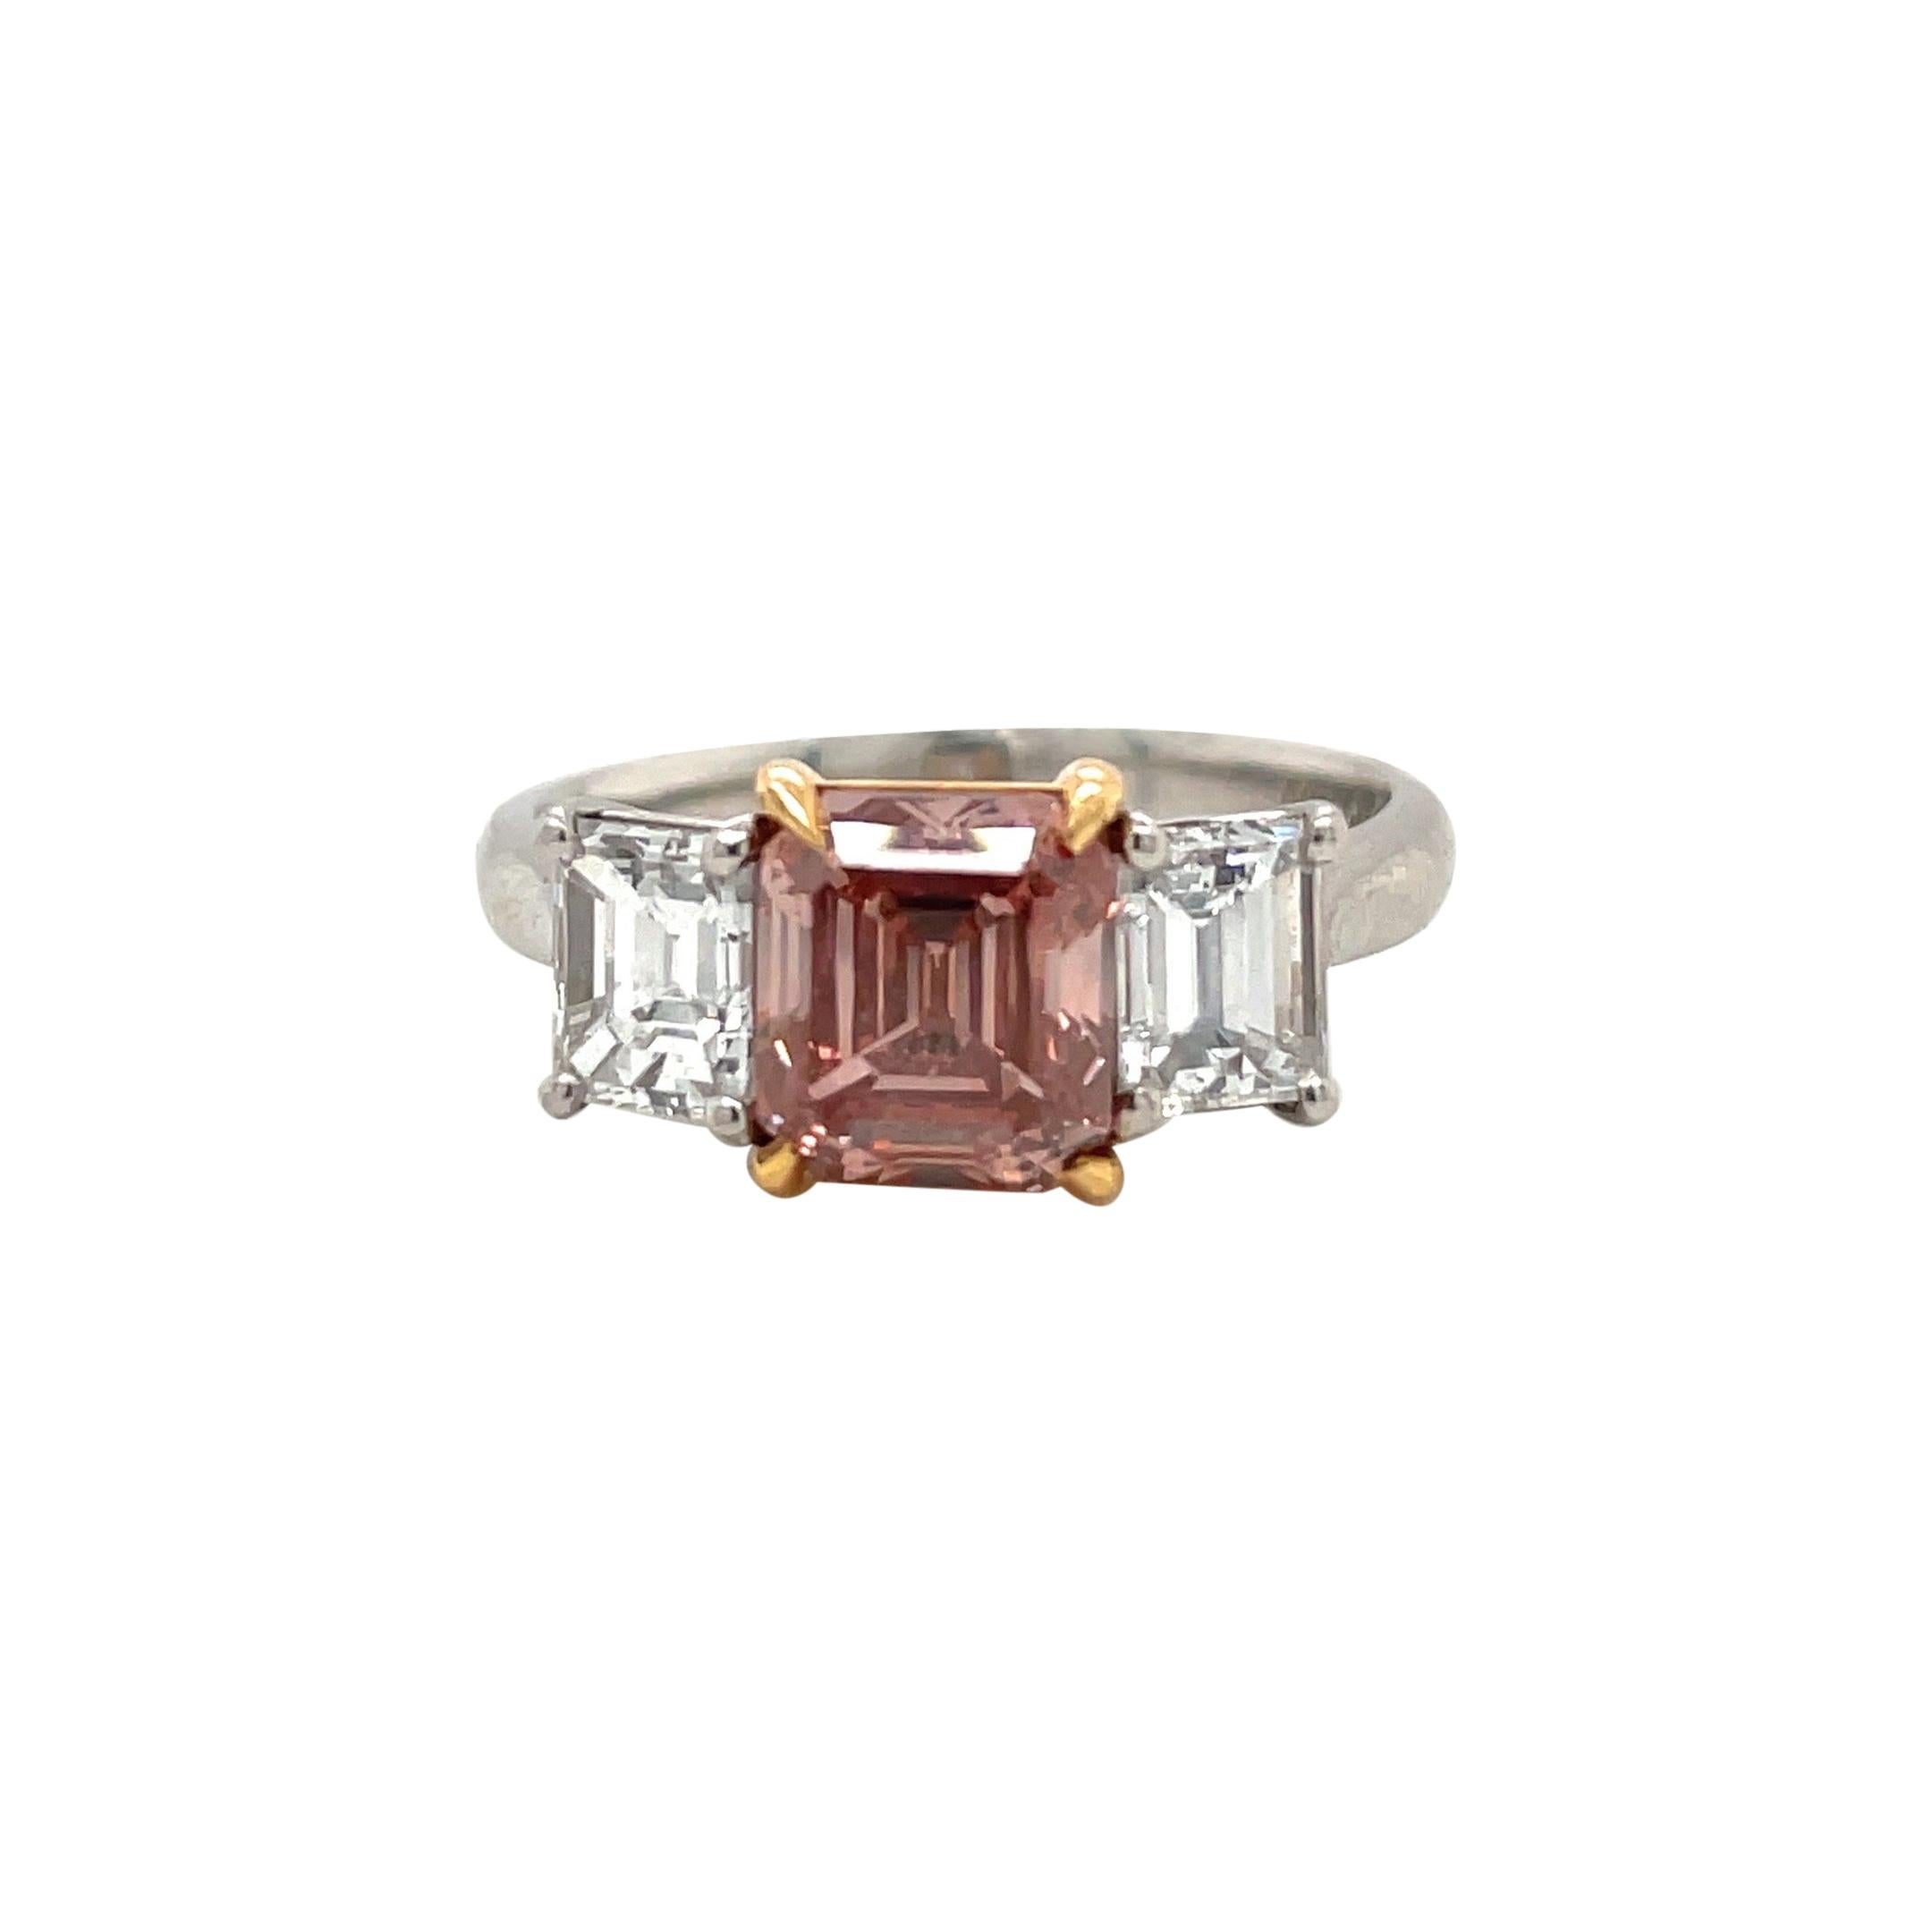 1.75ct GIA Natural Fancy Pink Emerald Cut Diamond Ring For Sale